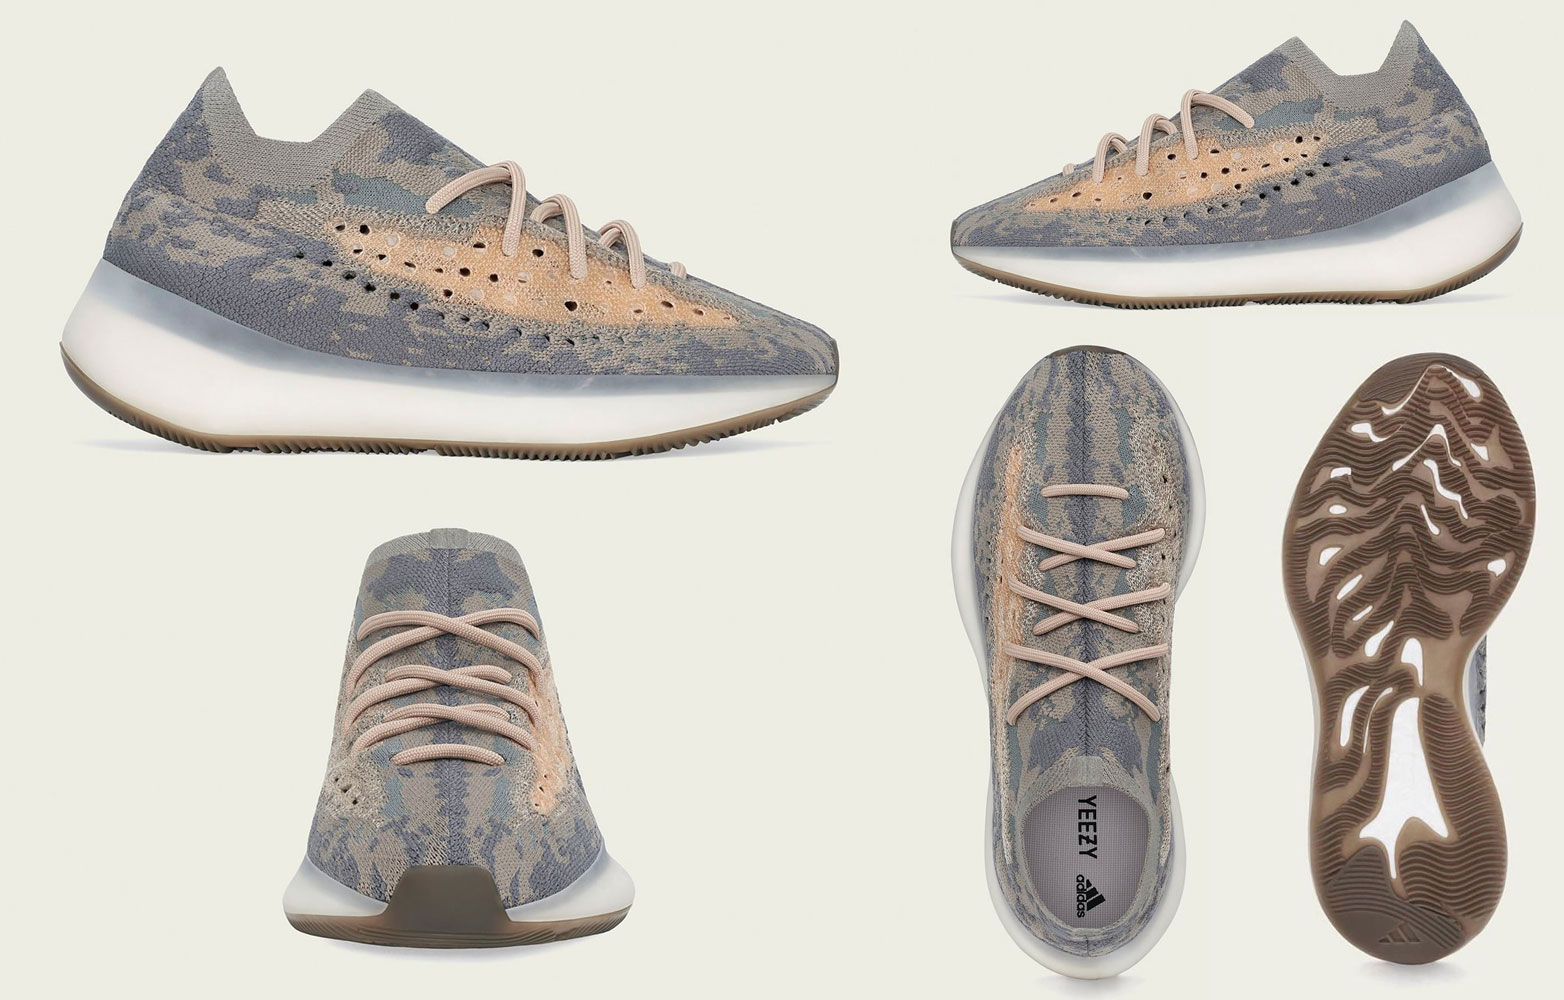 YEEZY BOOST 380 Mist Clothing Outfits | SneakerFits.com